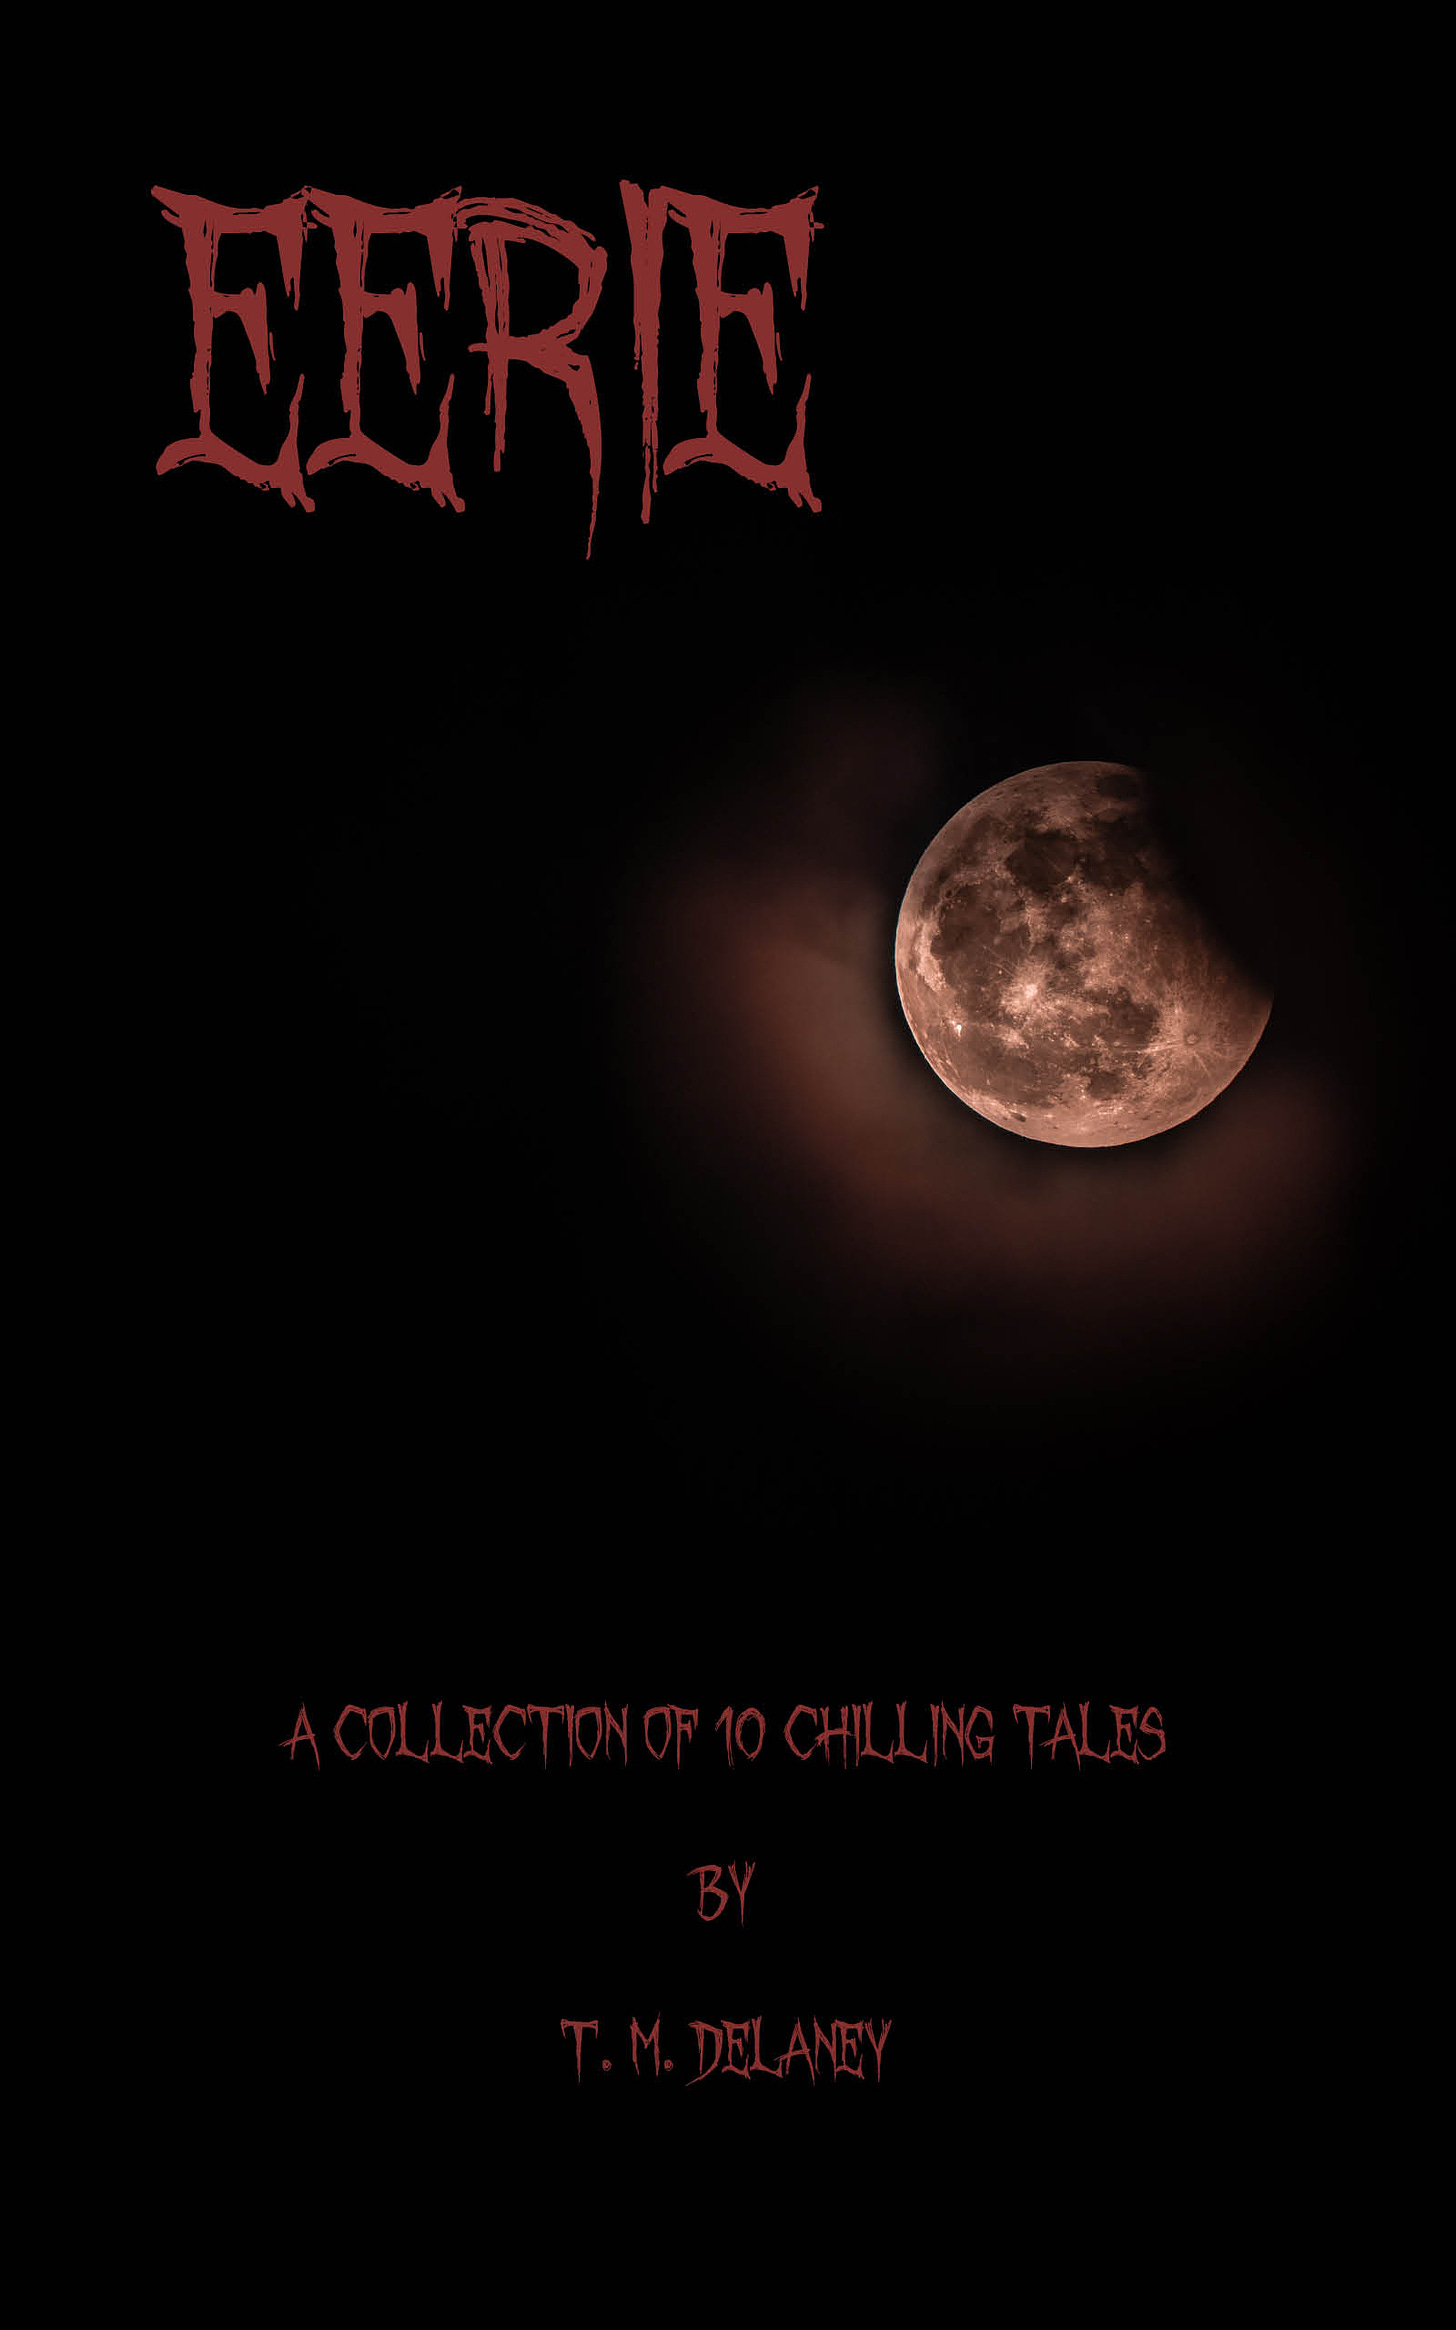 https://books2read.com/Eerie-A-Collection-of-10-Chilling-Tales